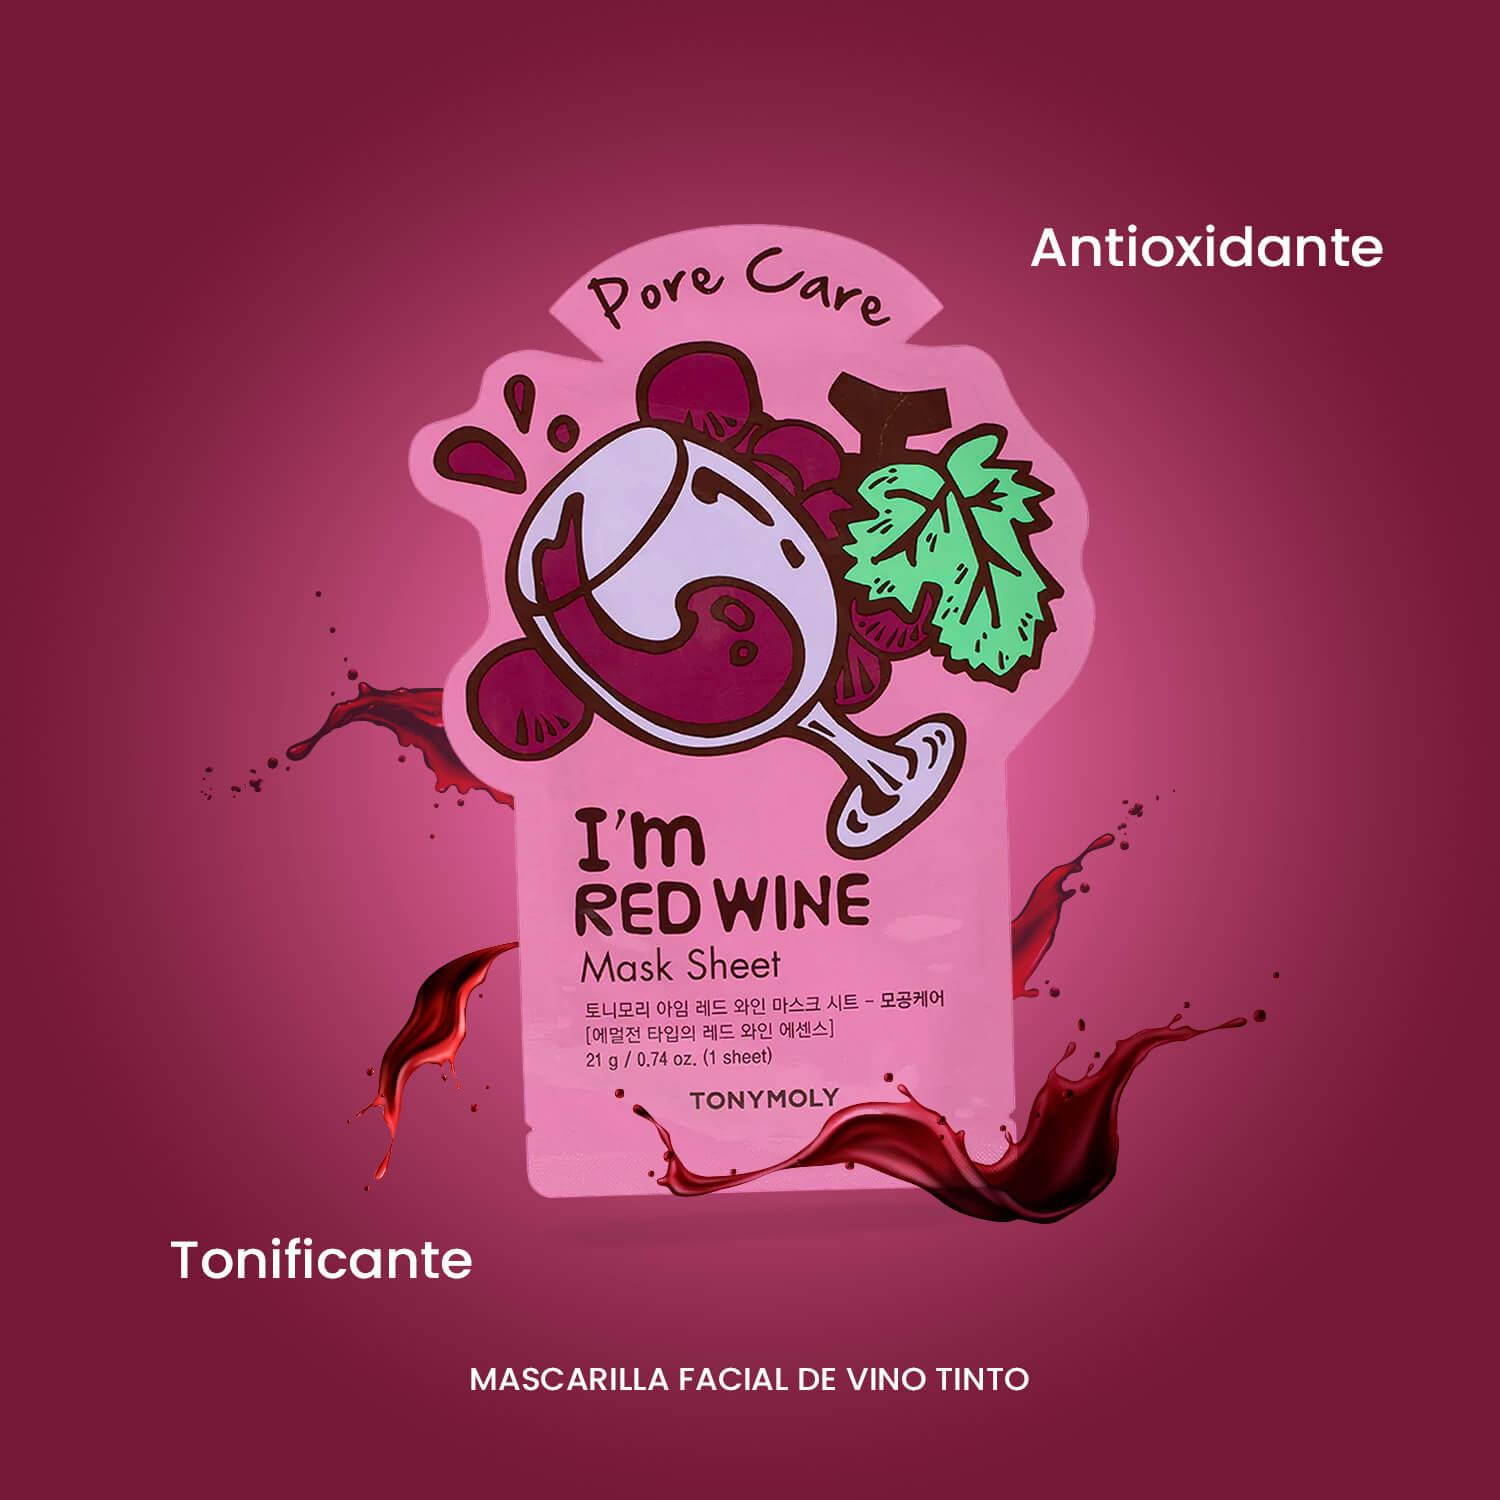 I AM REAL RED WINE MASK SHEET-PORE CARE